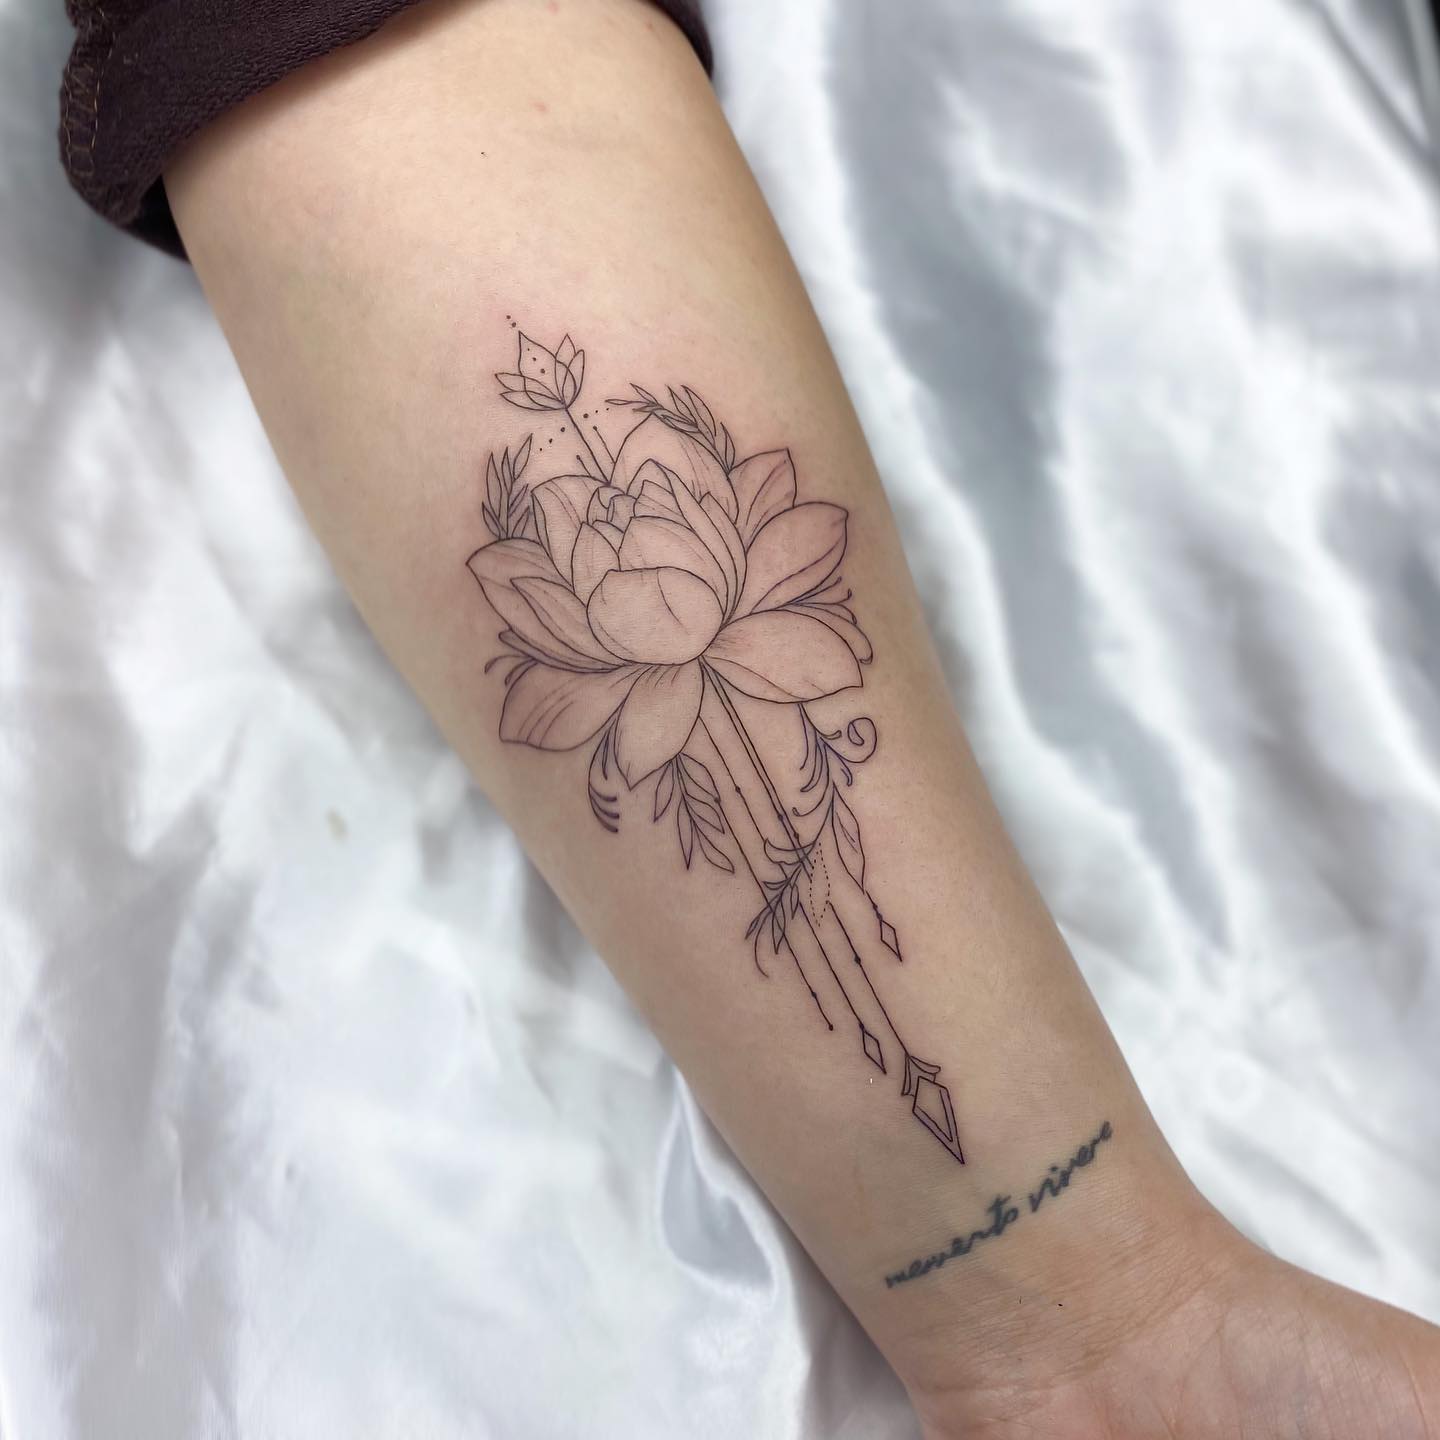 These Lotus Flower Tattoos Will Help You Find Inner Peace  Lotus flower  tattoo Tattoos for women flowers Mandala tattoos for women